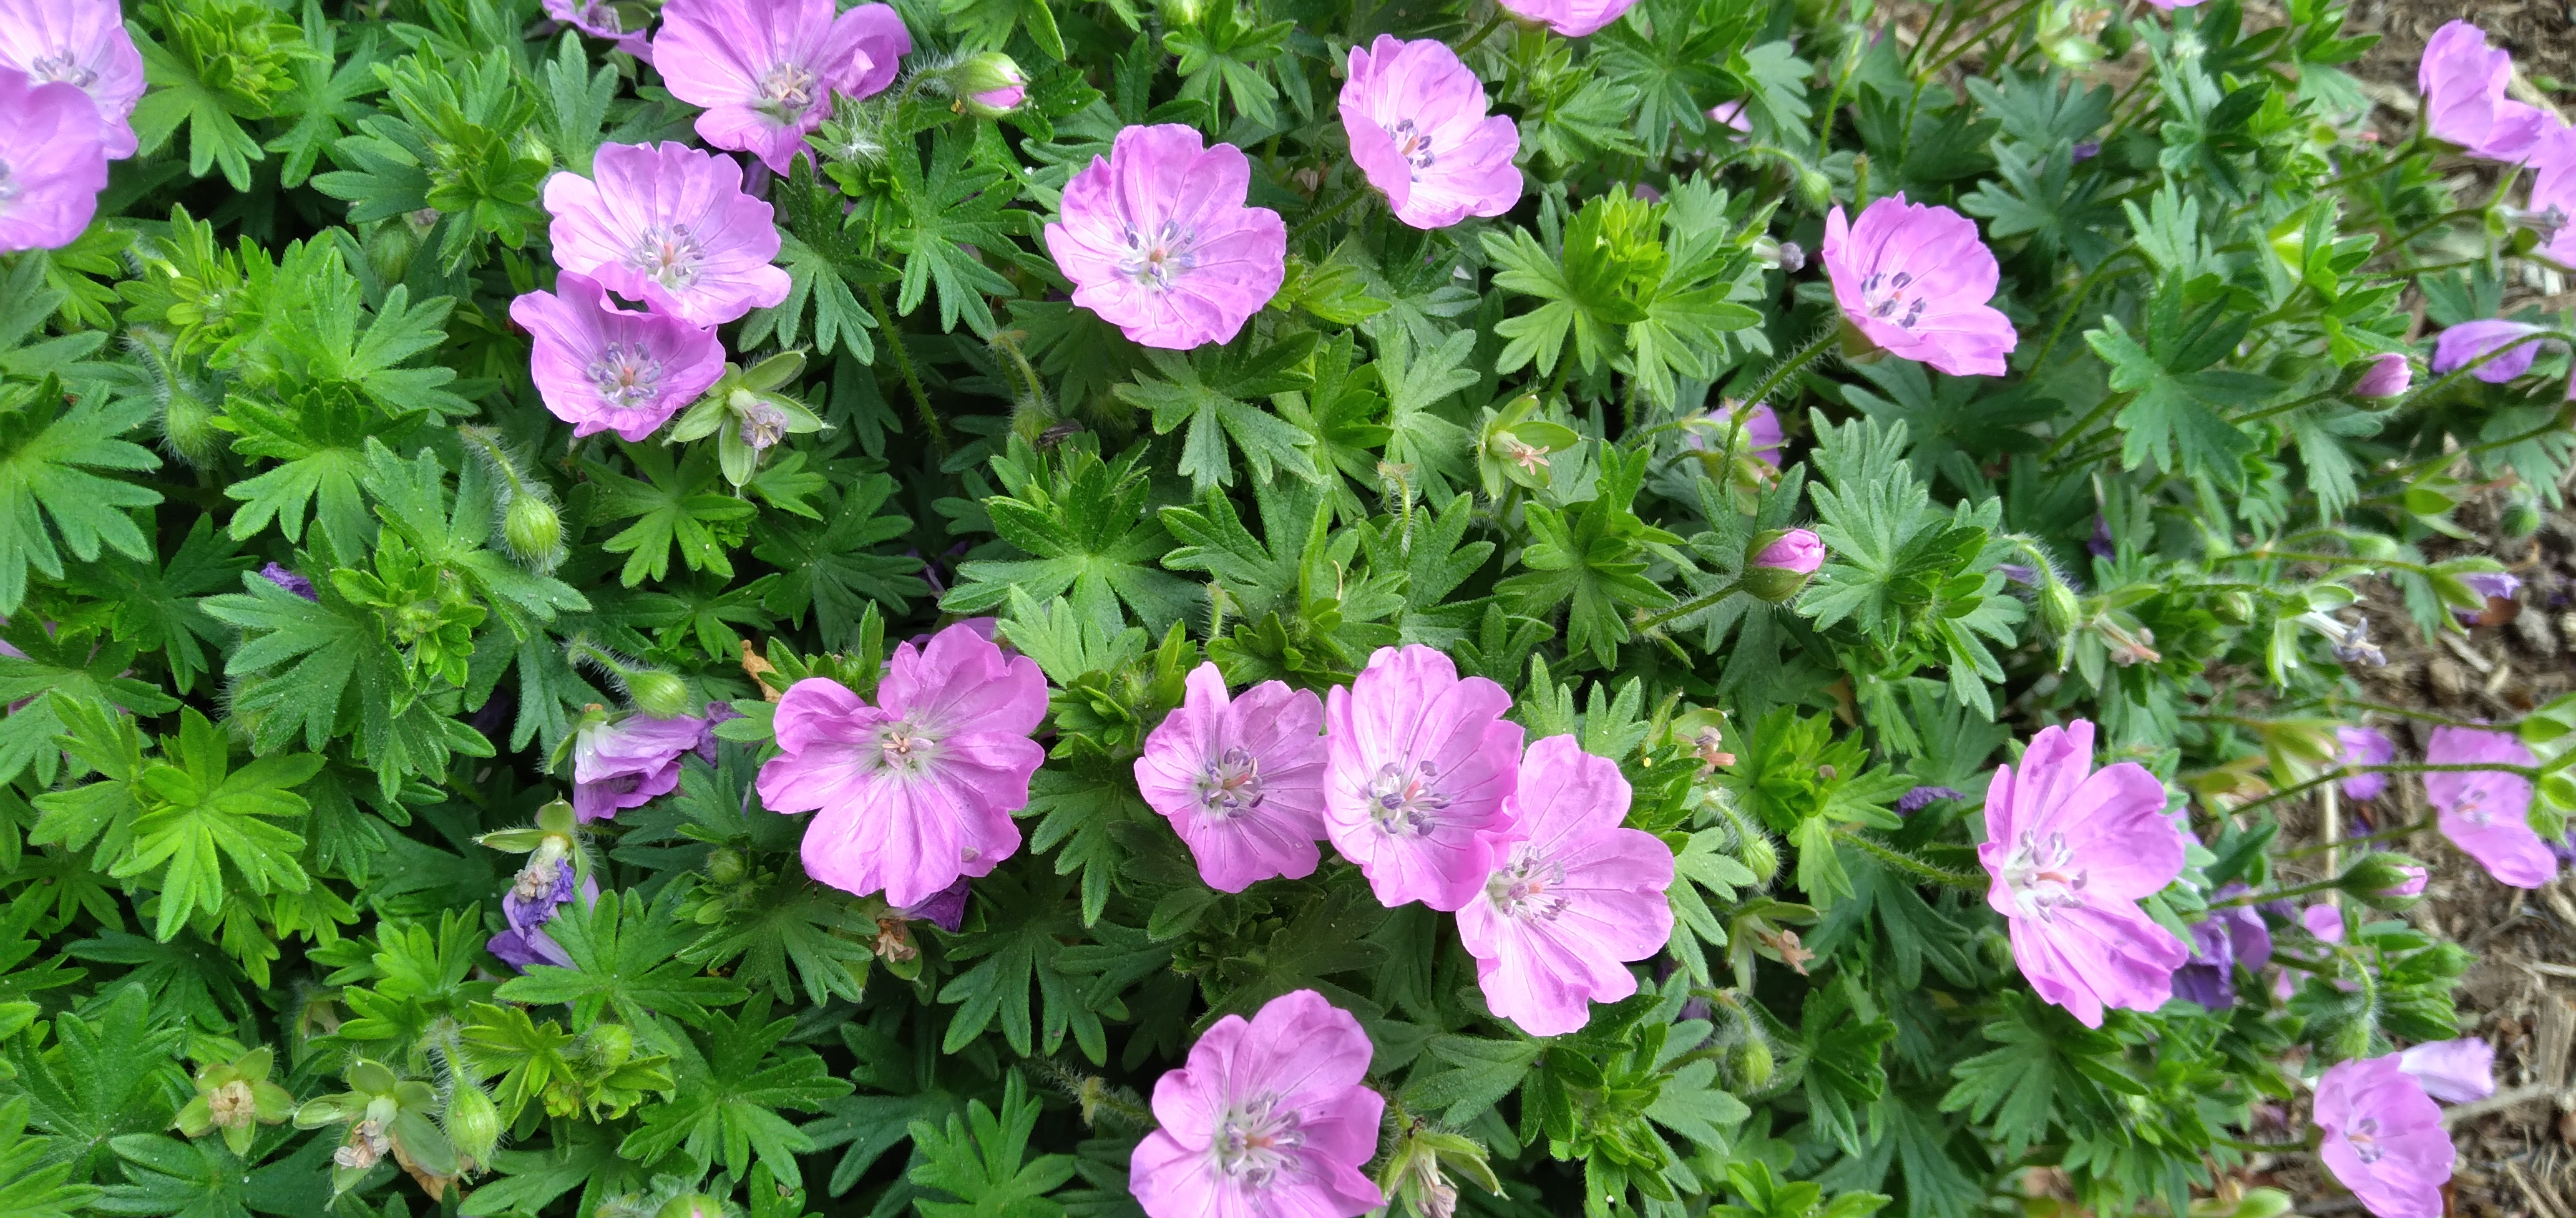 A close-up of pink flowers on a green leafy plant